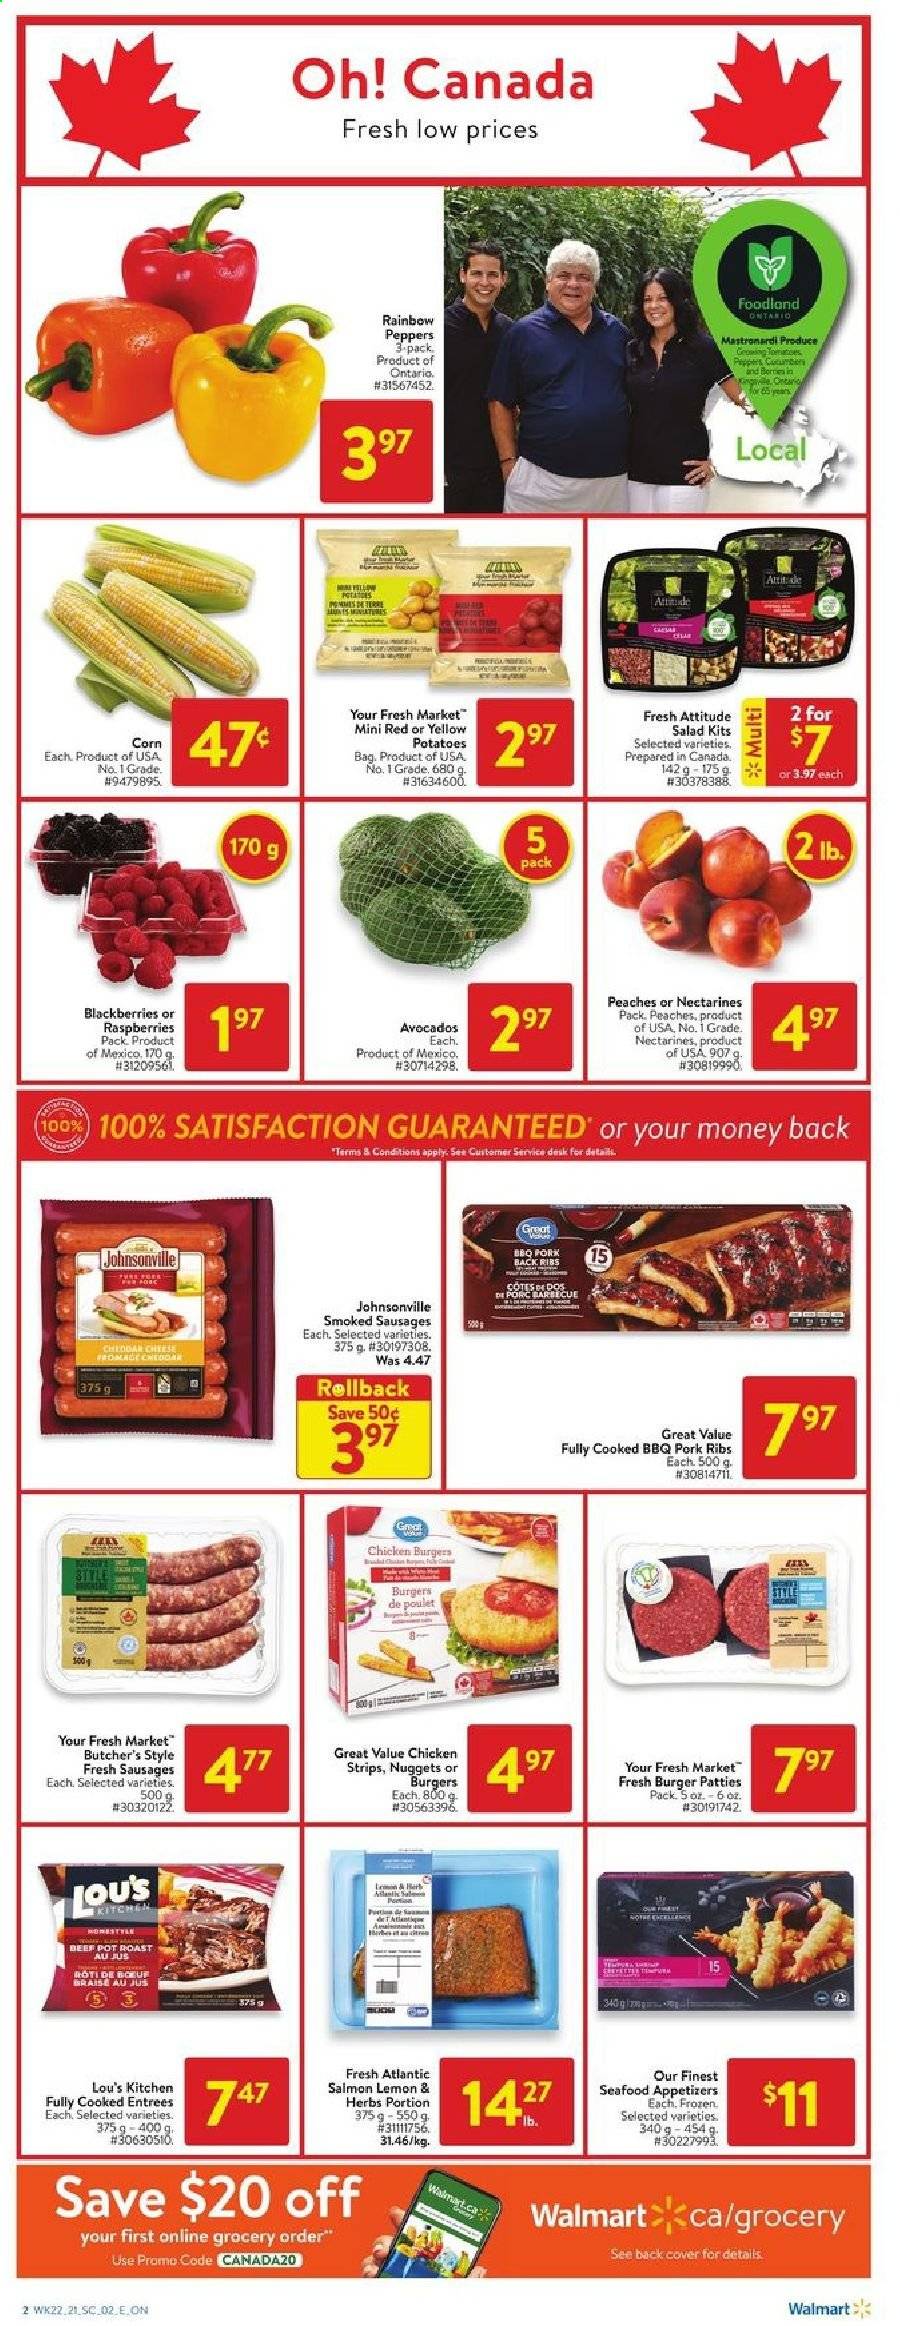 thumbnail - Walmart Flyer - June 24, 2021 - June 30, 2021 - Sales products - corn, tomatoes, potatoes, salad, peppers, avocado, blackberries, nectarines, peaches, salmon, seafood, nuggets, Johnsonville, sausage, cheese, strips, chicken strips, burger patties, pork meat, pork ribs, pork back ribs, pot. Page 2.